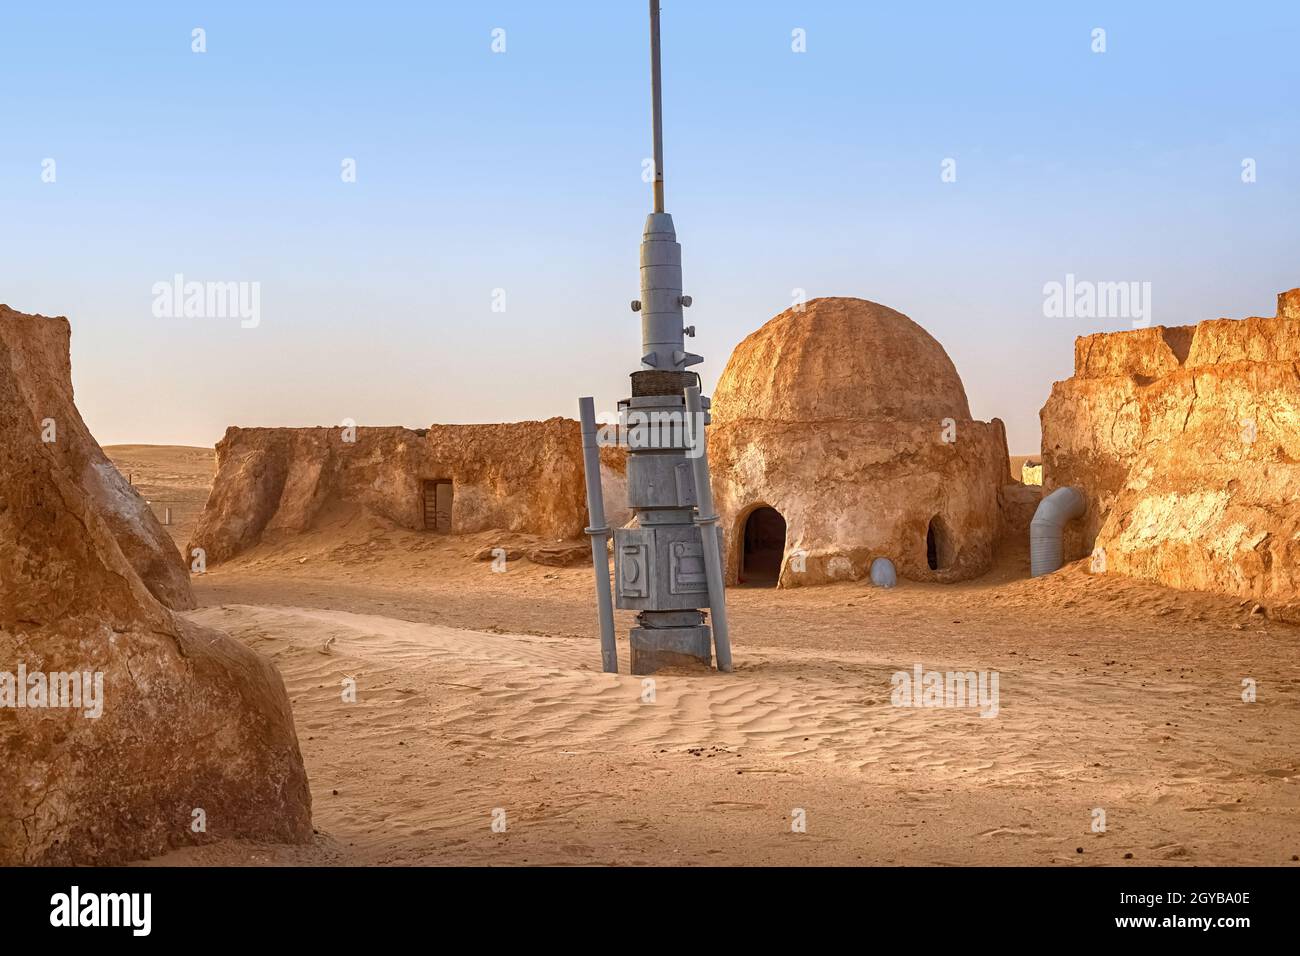 SAKHARA, Tunisia - May 17, 2021: The abandoned scenery of the planet Tatooine for the filming of Star Wars in the Sahara Desert with sand dunes in the Stock Photo